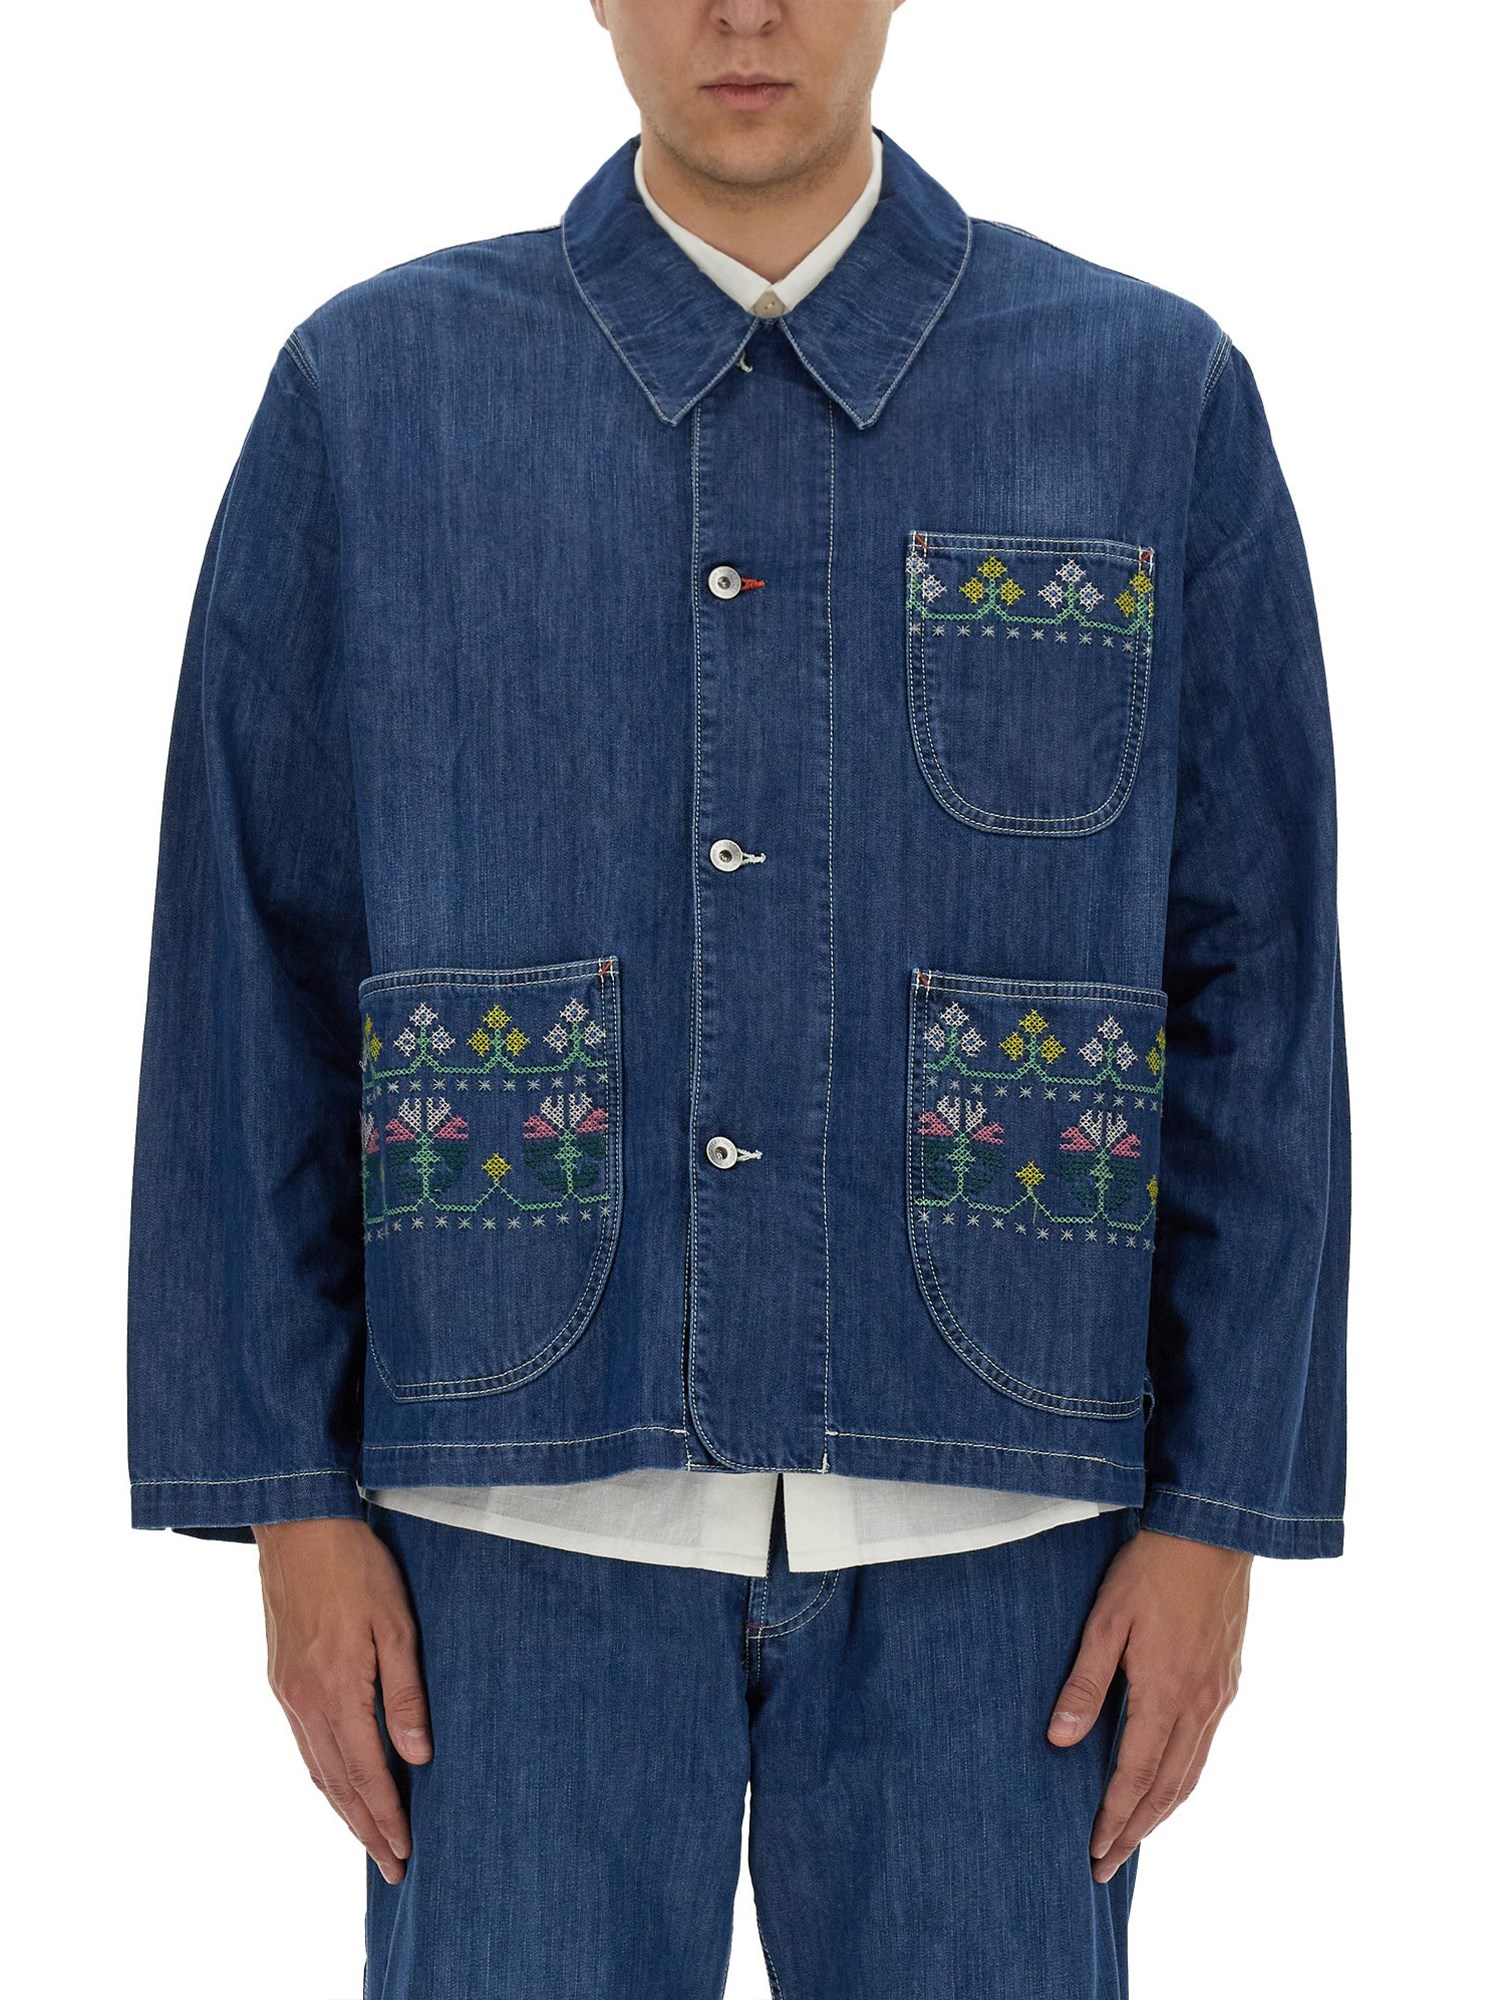 ymc jacket with embroidery